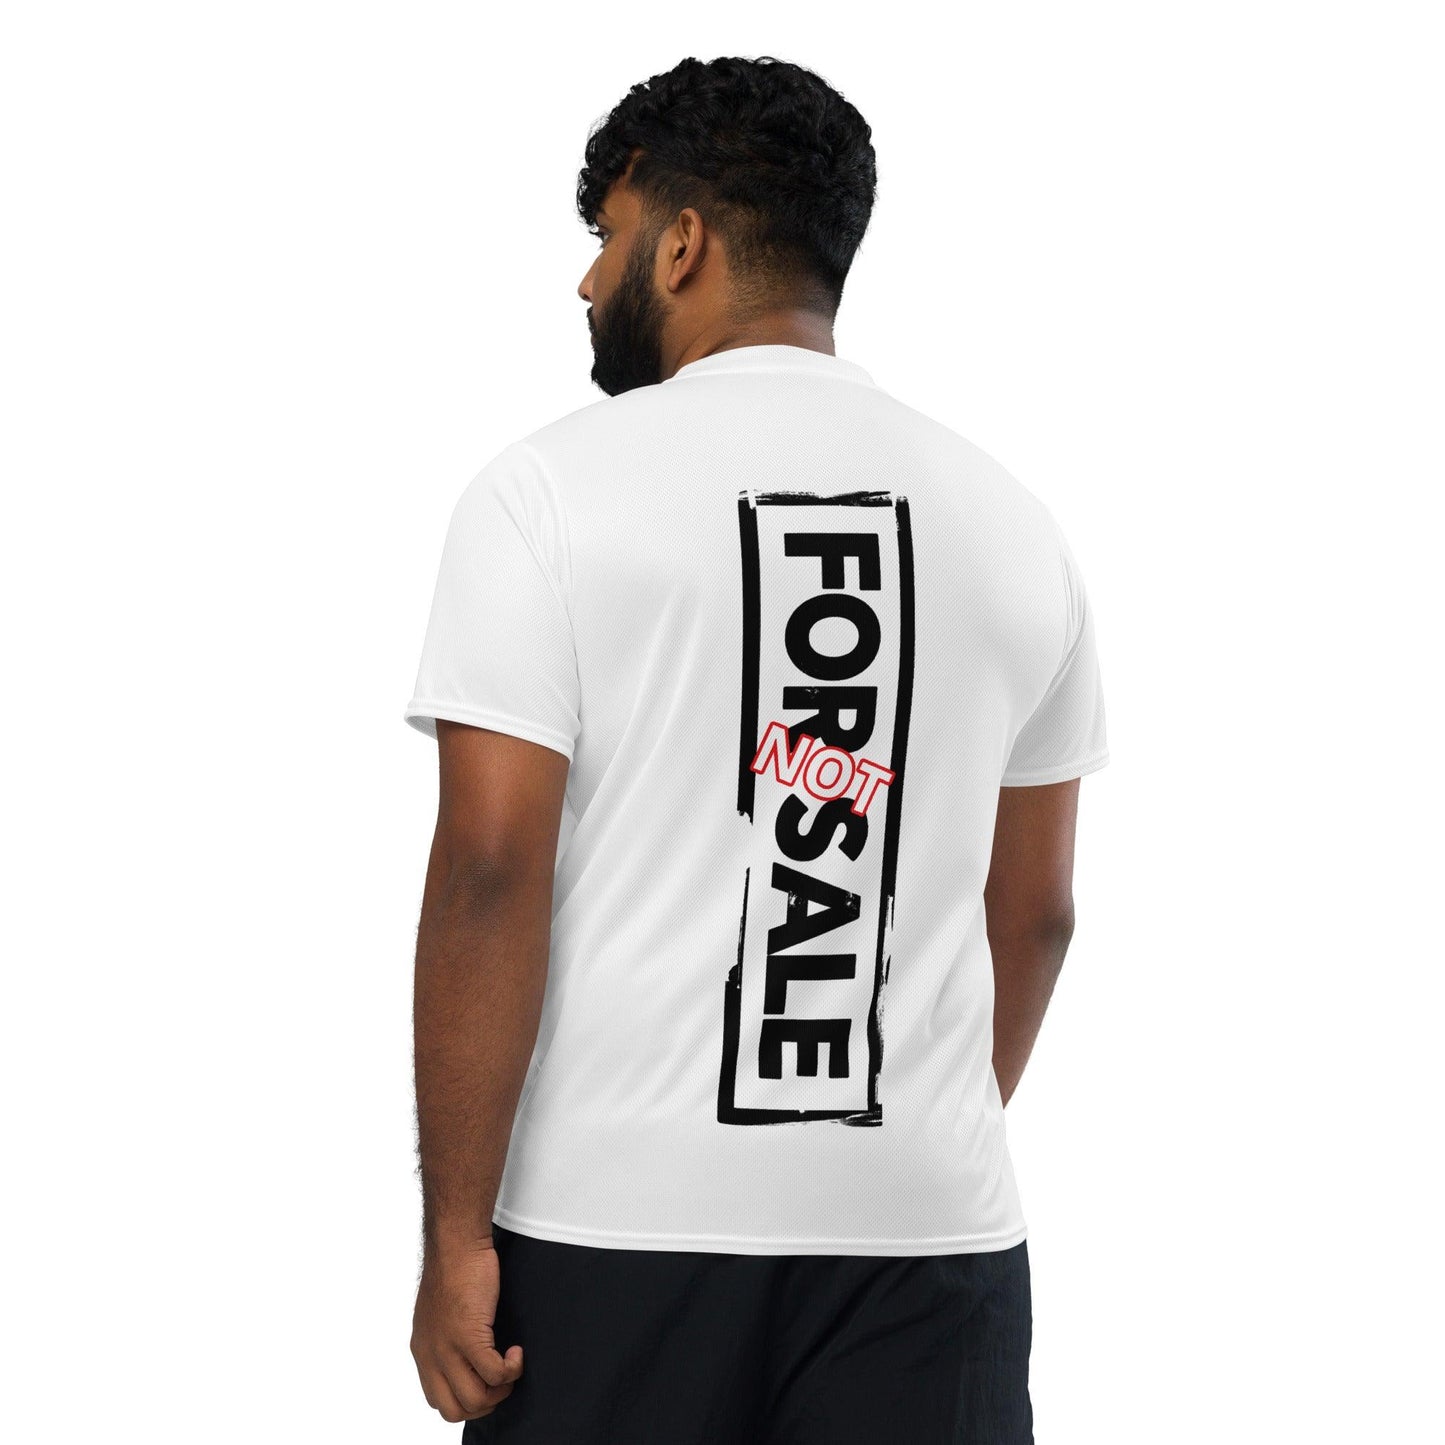 Not For Sale Black Stamp - Unisex Sports Jersey - iSAW Company